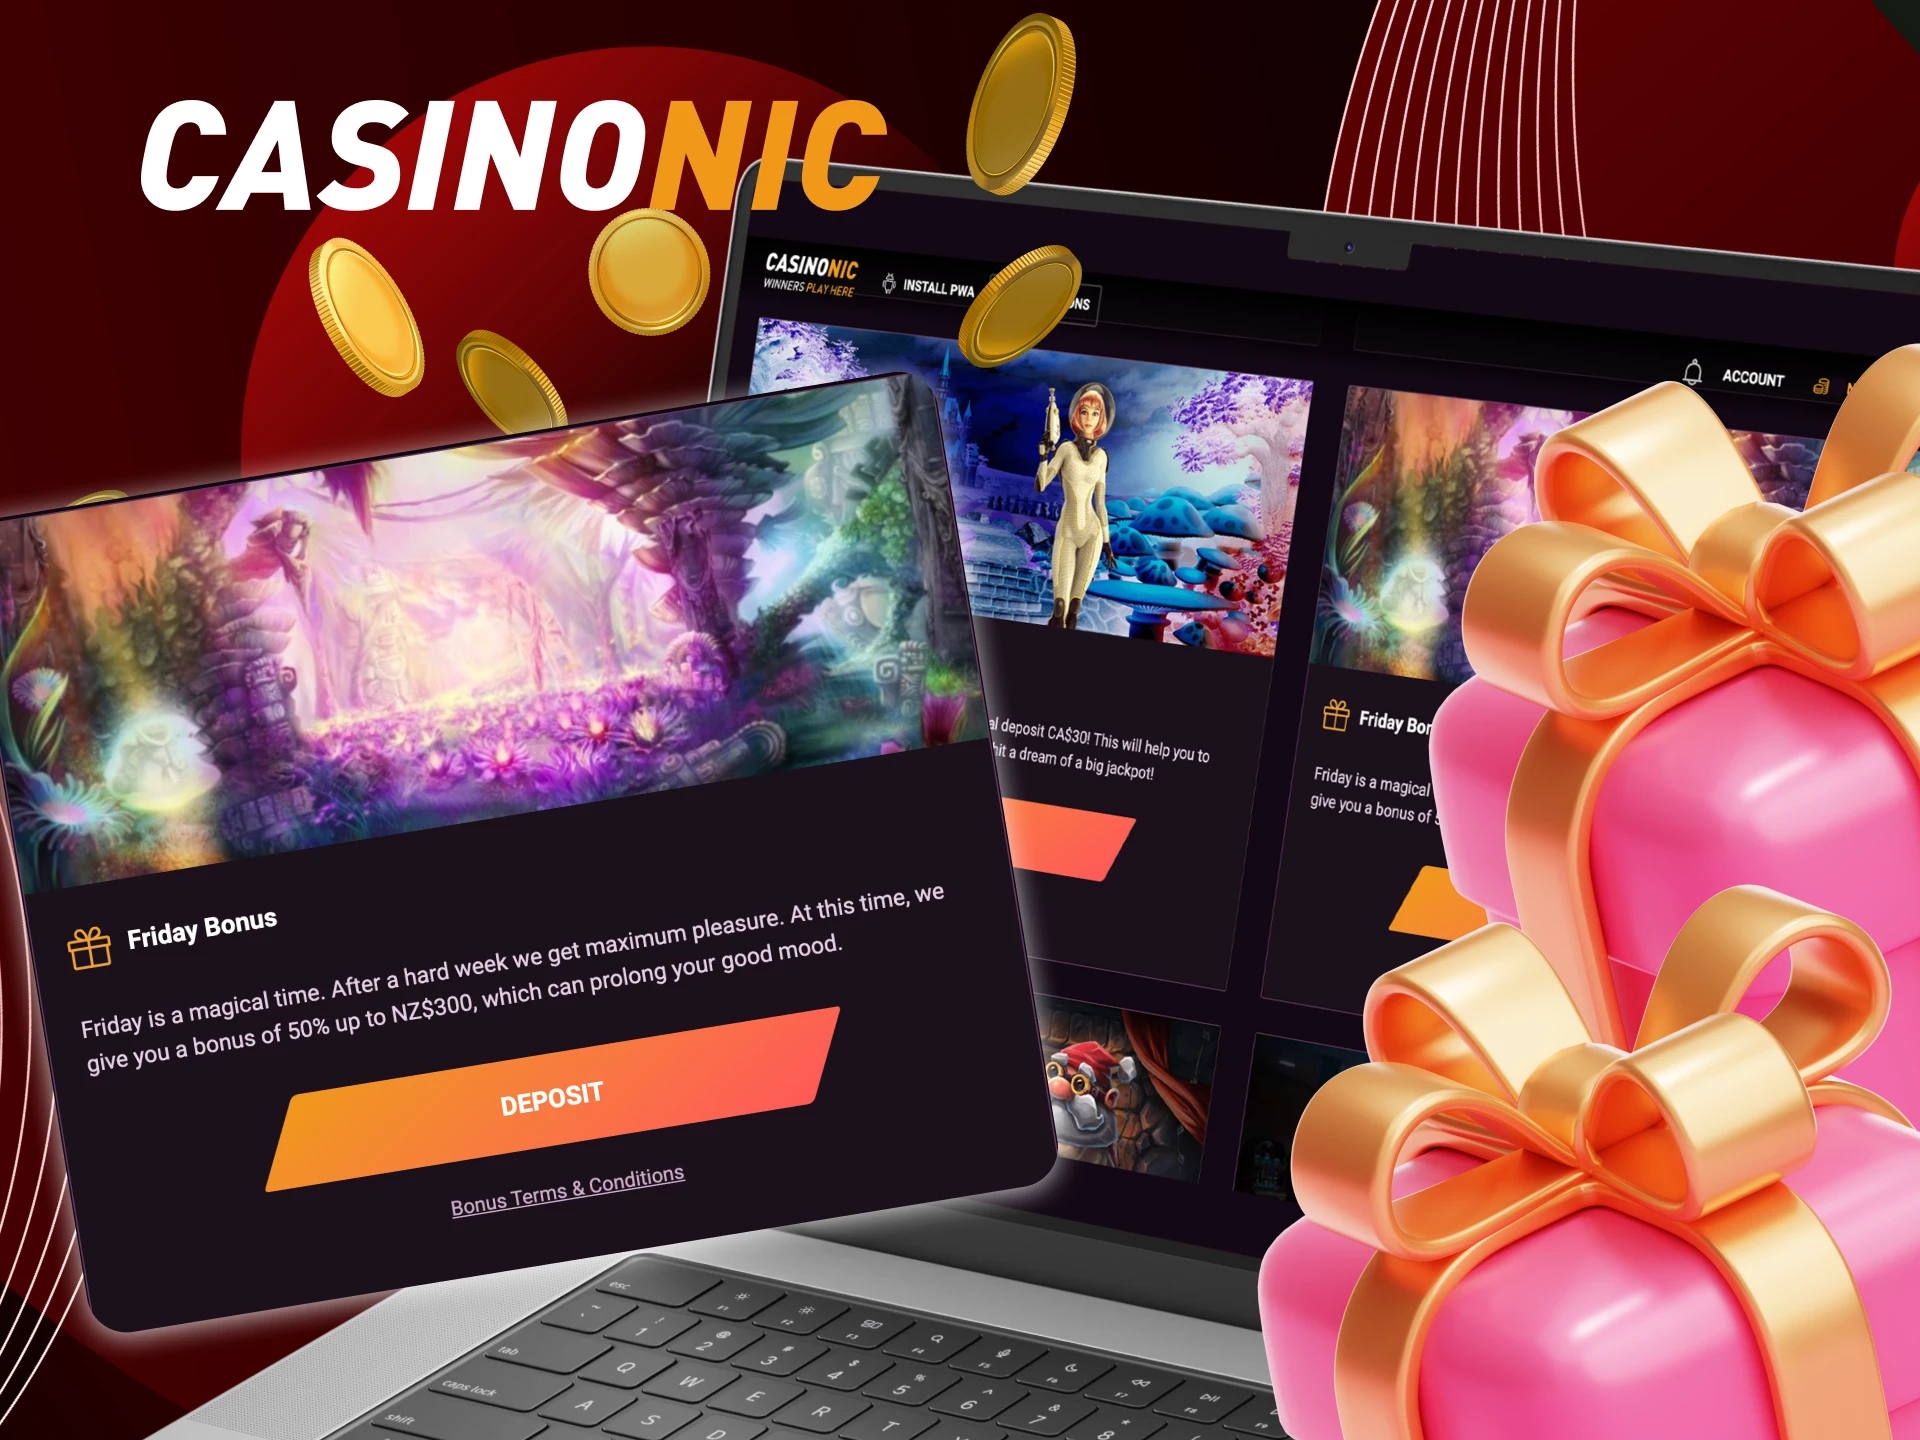 Are there any bonuses before the weekend for players in the online casino CasinoNic.